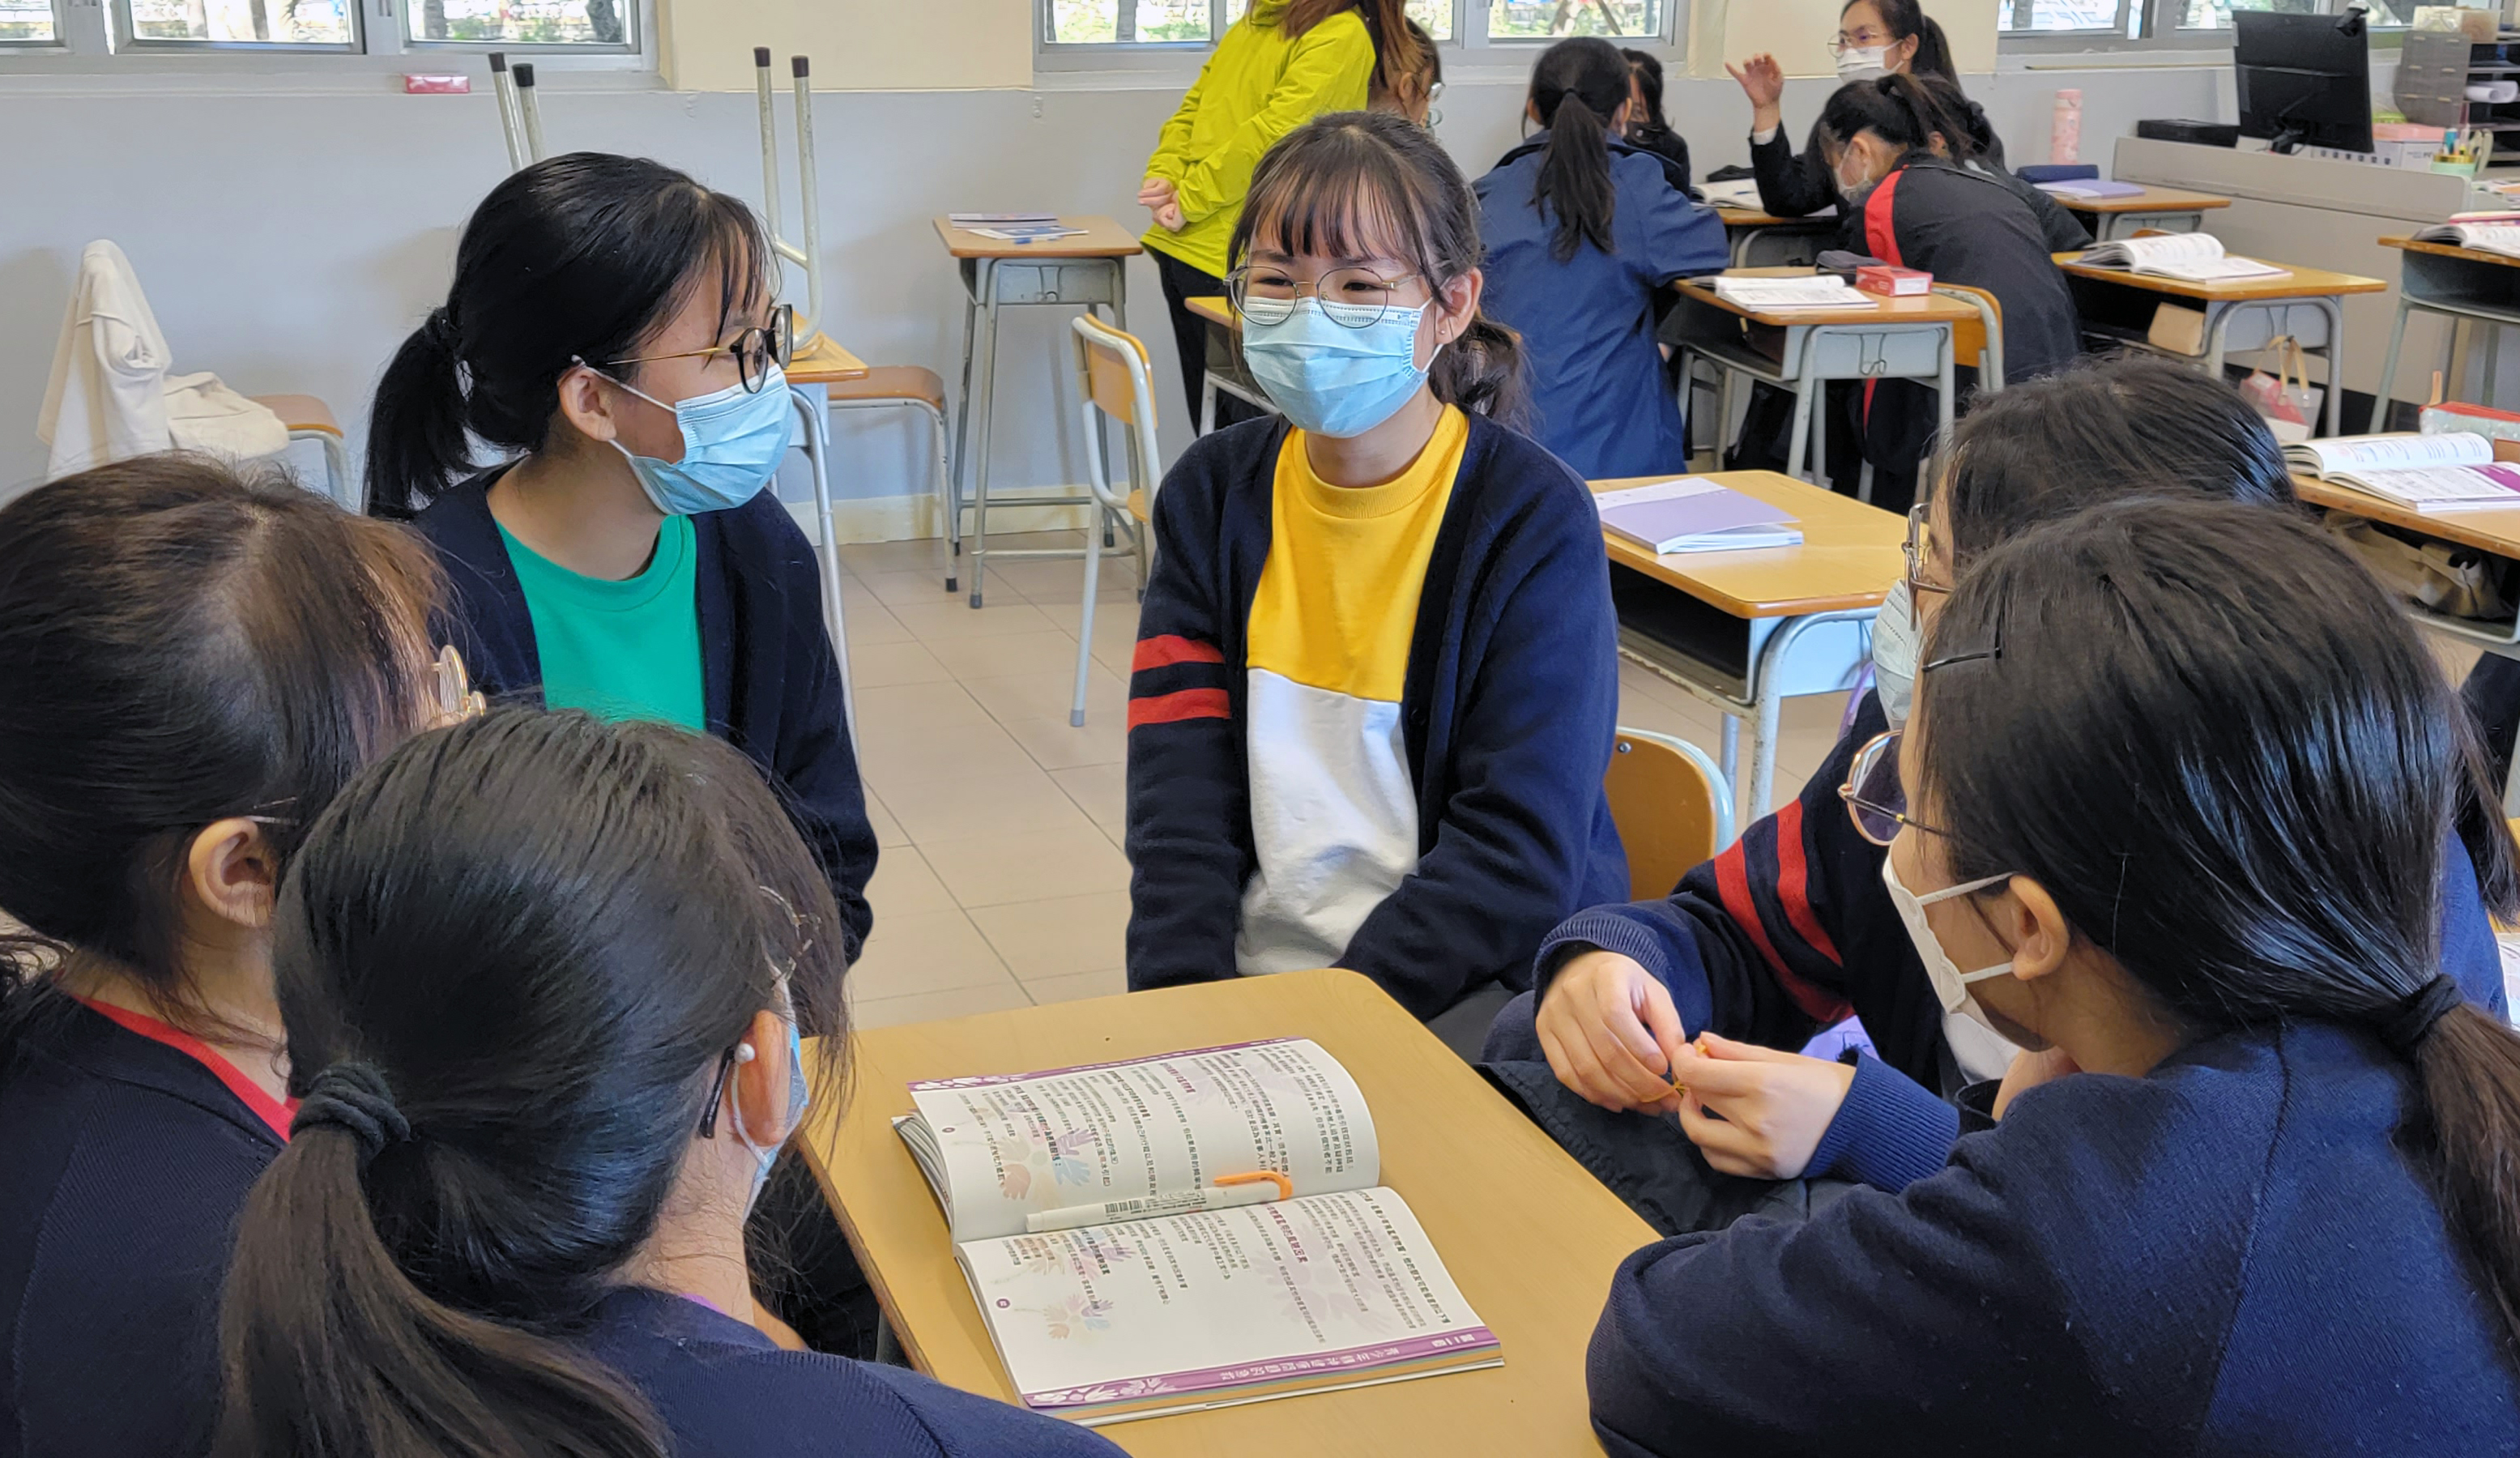 A group of students wearing face masks in a classroomDescription automatically generated